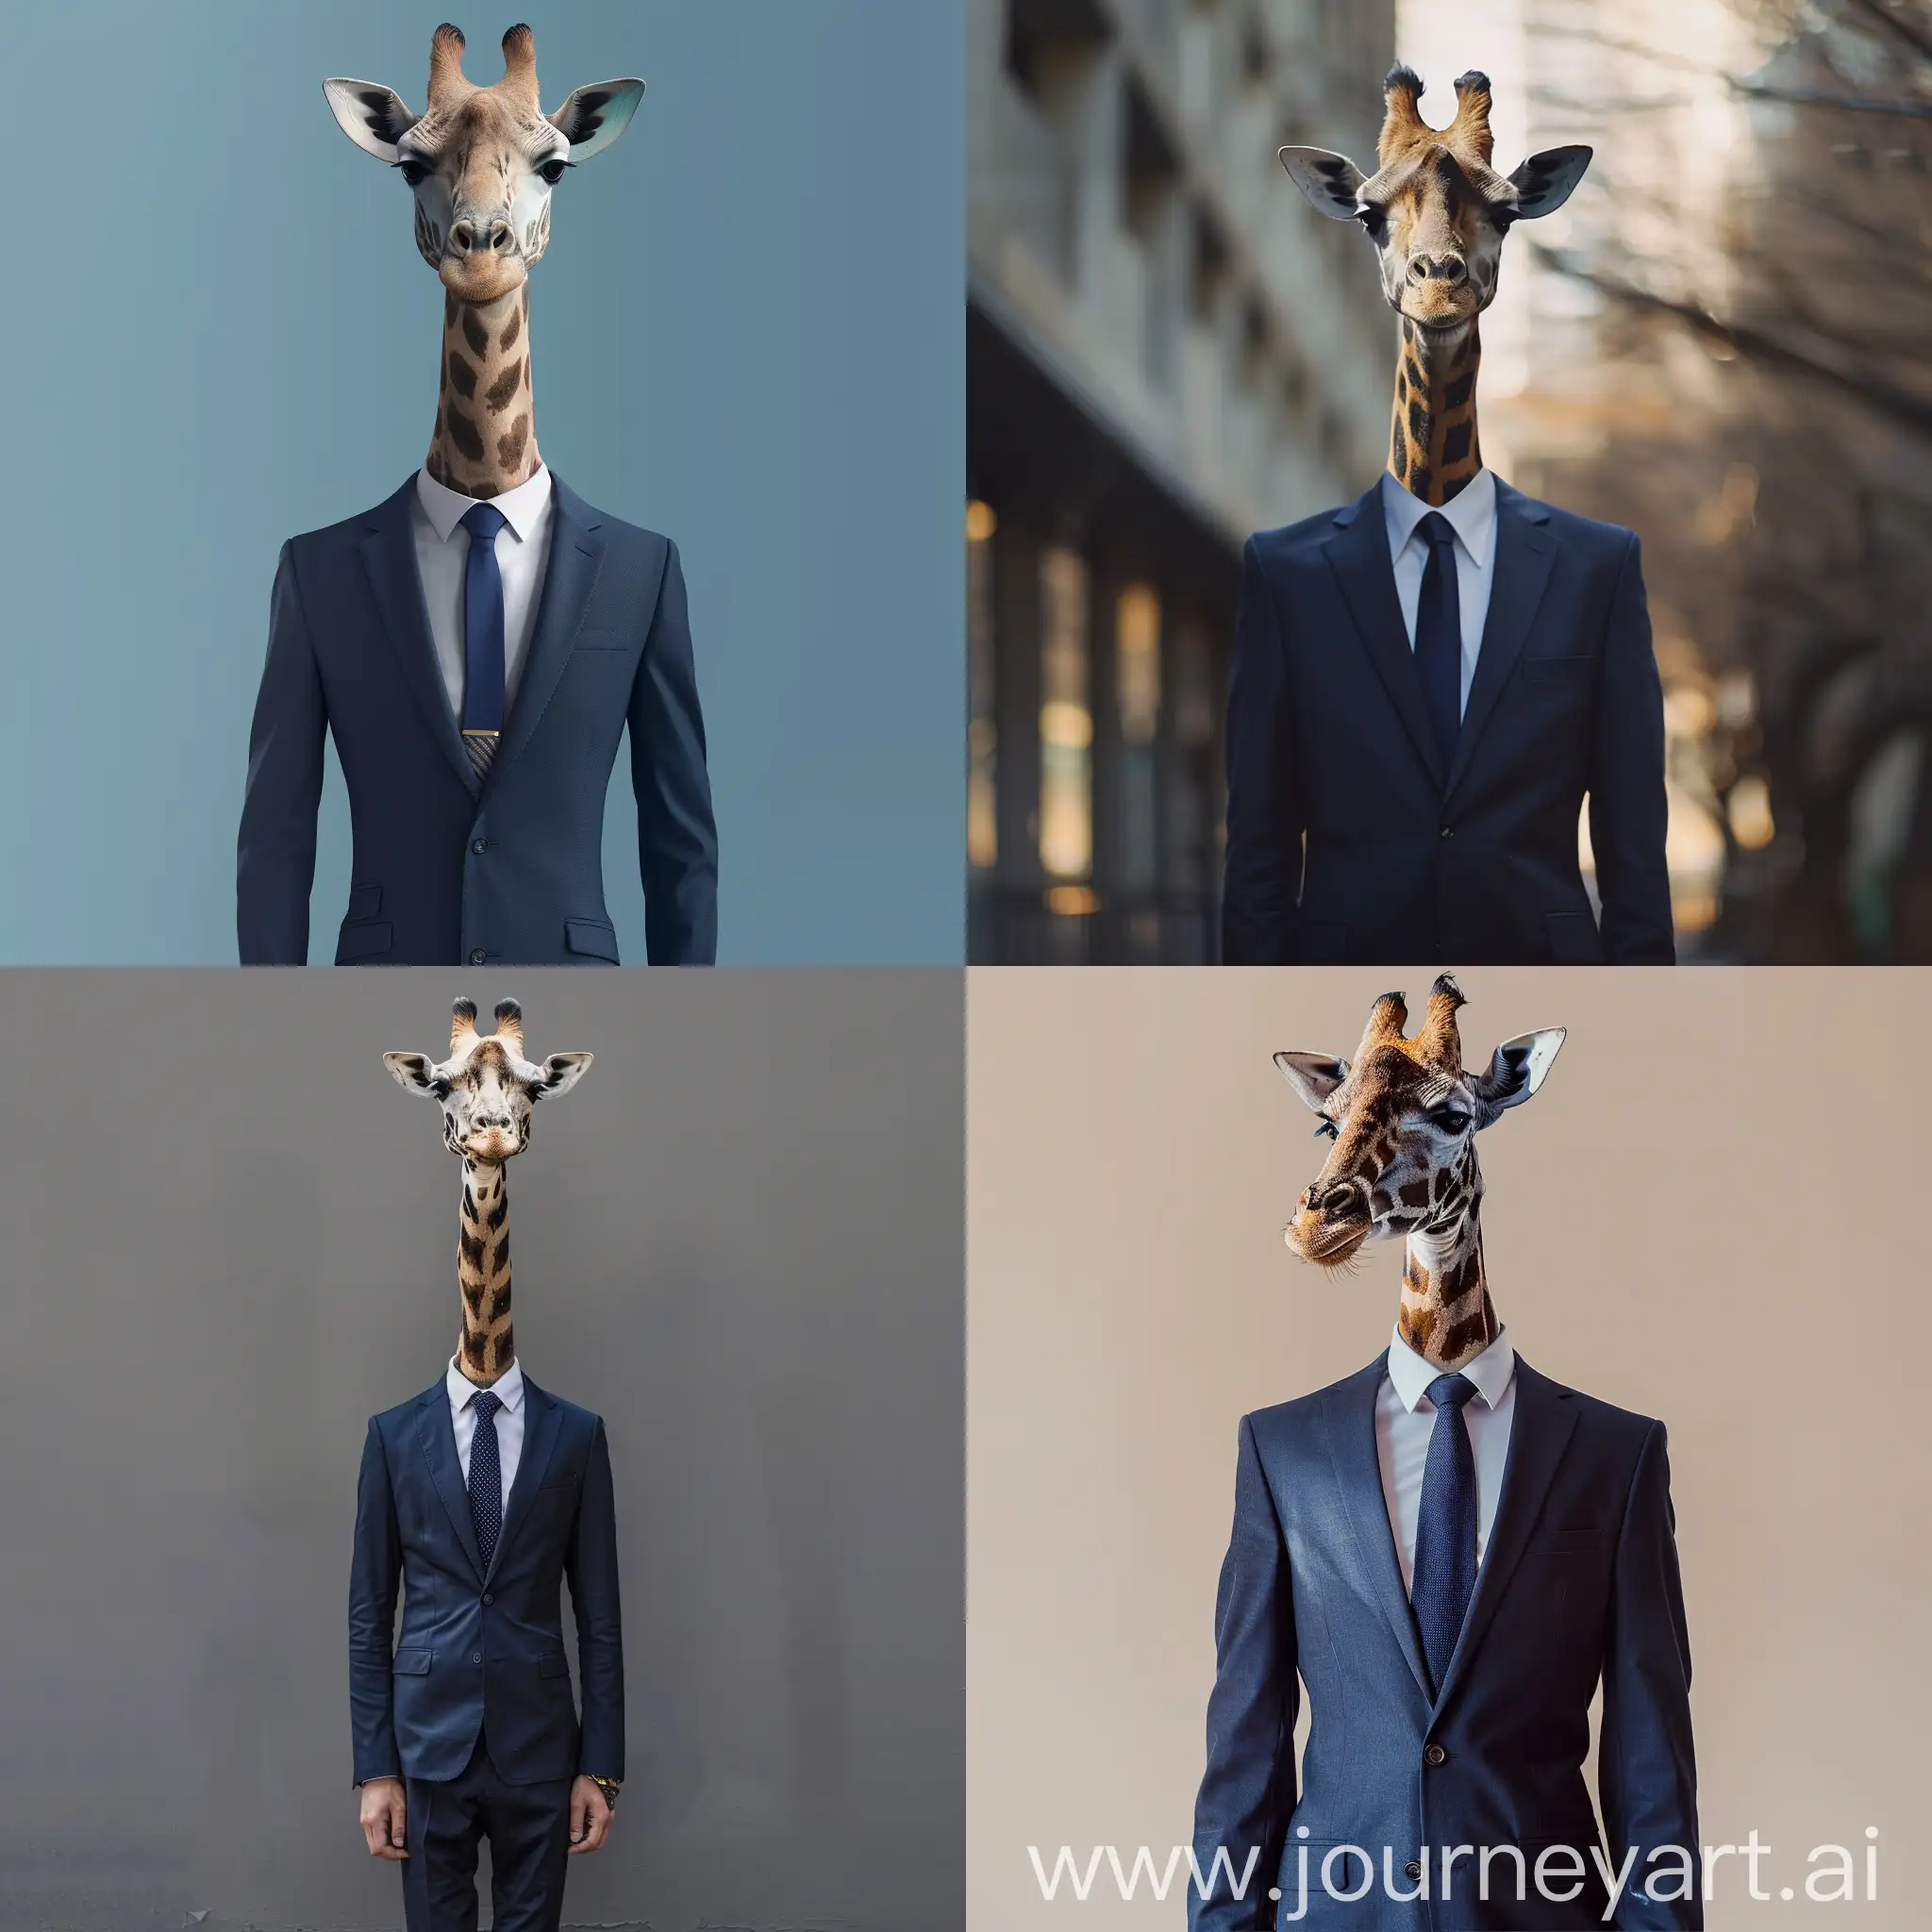 The giraffe stands tall, its long neck gracefully arching upward, adorned with a finely tailored business suit that accentuates its elegant stature. The suit is a classic navy blue, impeccably fitted to the giraffe's slim yet towering frame. The jacket features sharp, sleek lapels and is fastened with a single button at the chest, allowing the fabric to drape flawlessly over the giraffe’s distinctive, spotted fur.   Beneath the jacket lies a crisp, white dress shirt, perfectly pressed and buttoned up to the neck, where a stylish navy blue tie rests, adding a touch of sophistication. The giraffe's elongated legs are clad in matching navy blue trousers, custom-made to complement its unique anatomy. Shiny black dress shoes, specially designed for the giraffe’s hooves, complete the ensemble, reflecting a subtle gleam under the light.  The overall effect is one of charming elegance, the giraffe carrying itself with a dignified air, its head held high and eyes gleaming with a gentle, knowing expression. The suit enhances its natural grace, making the giraffe look both distinguished and endearing, a true picture of sartorial splendor.